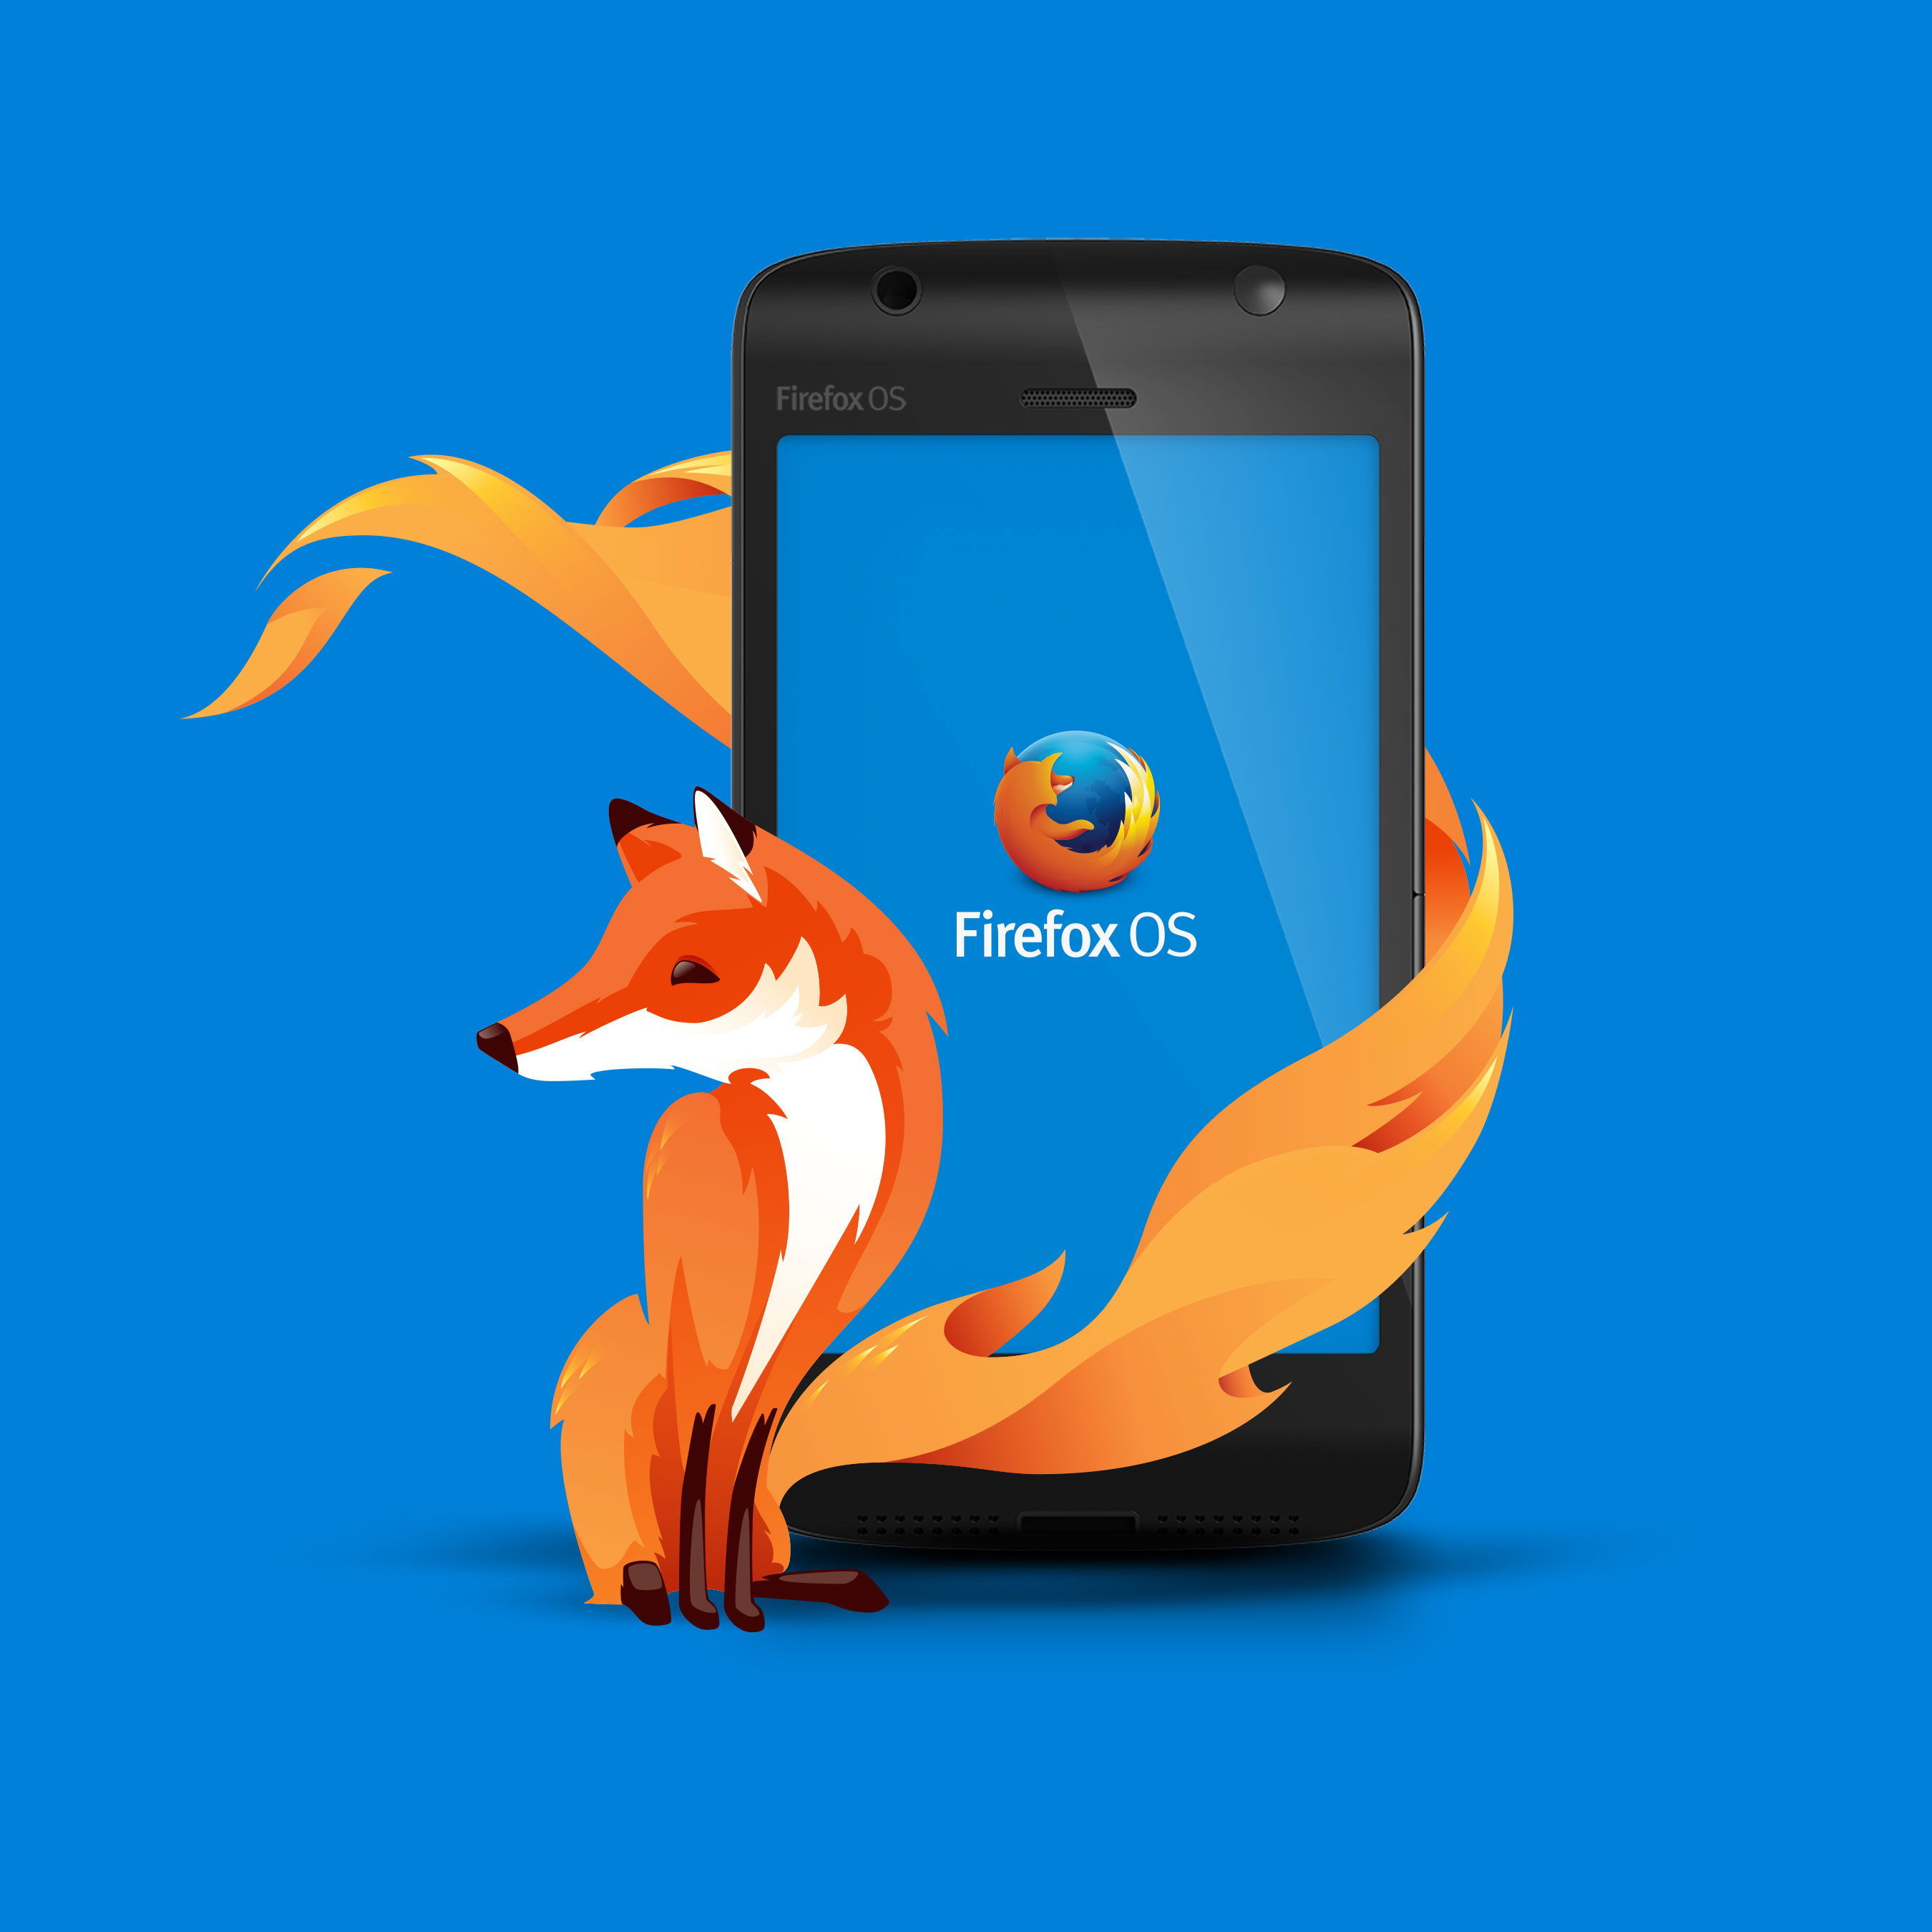 FAQ’s on the Cherry Mobile Ace (Powered by Firefox OS)